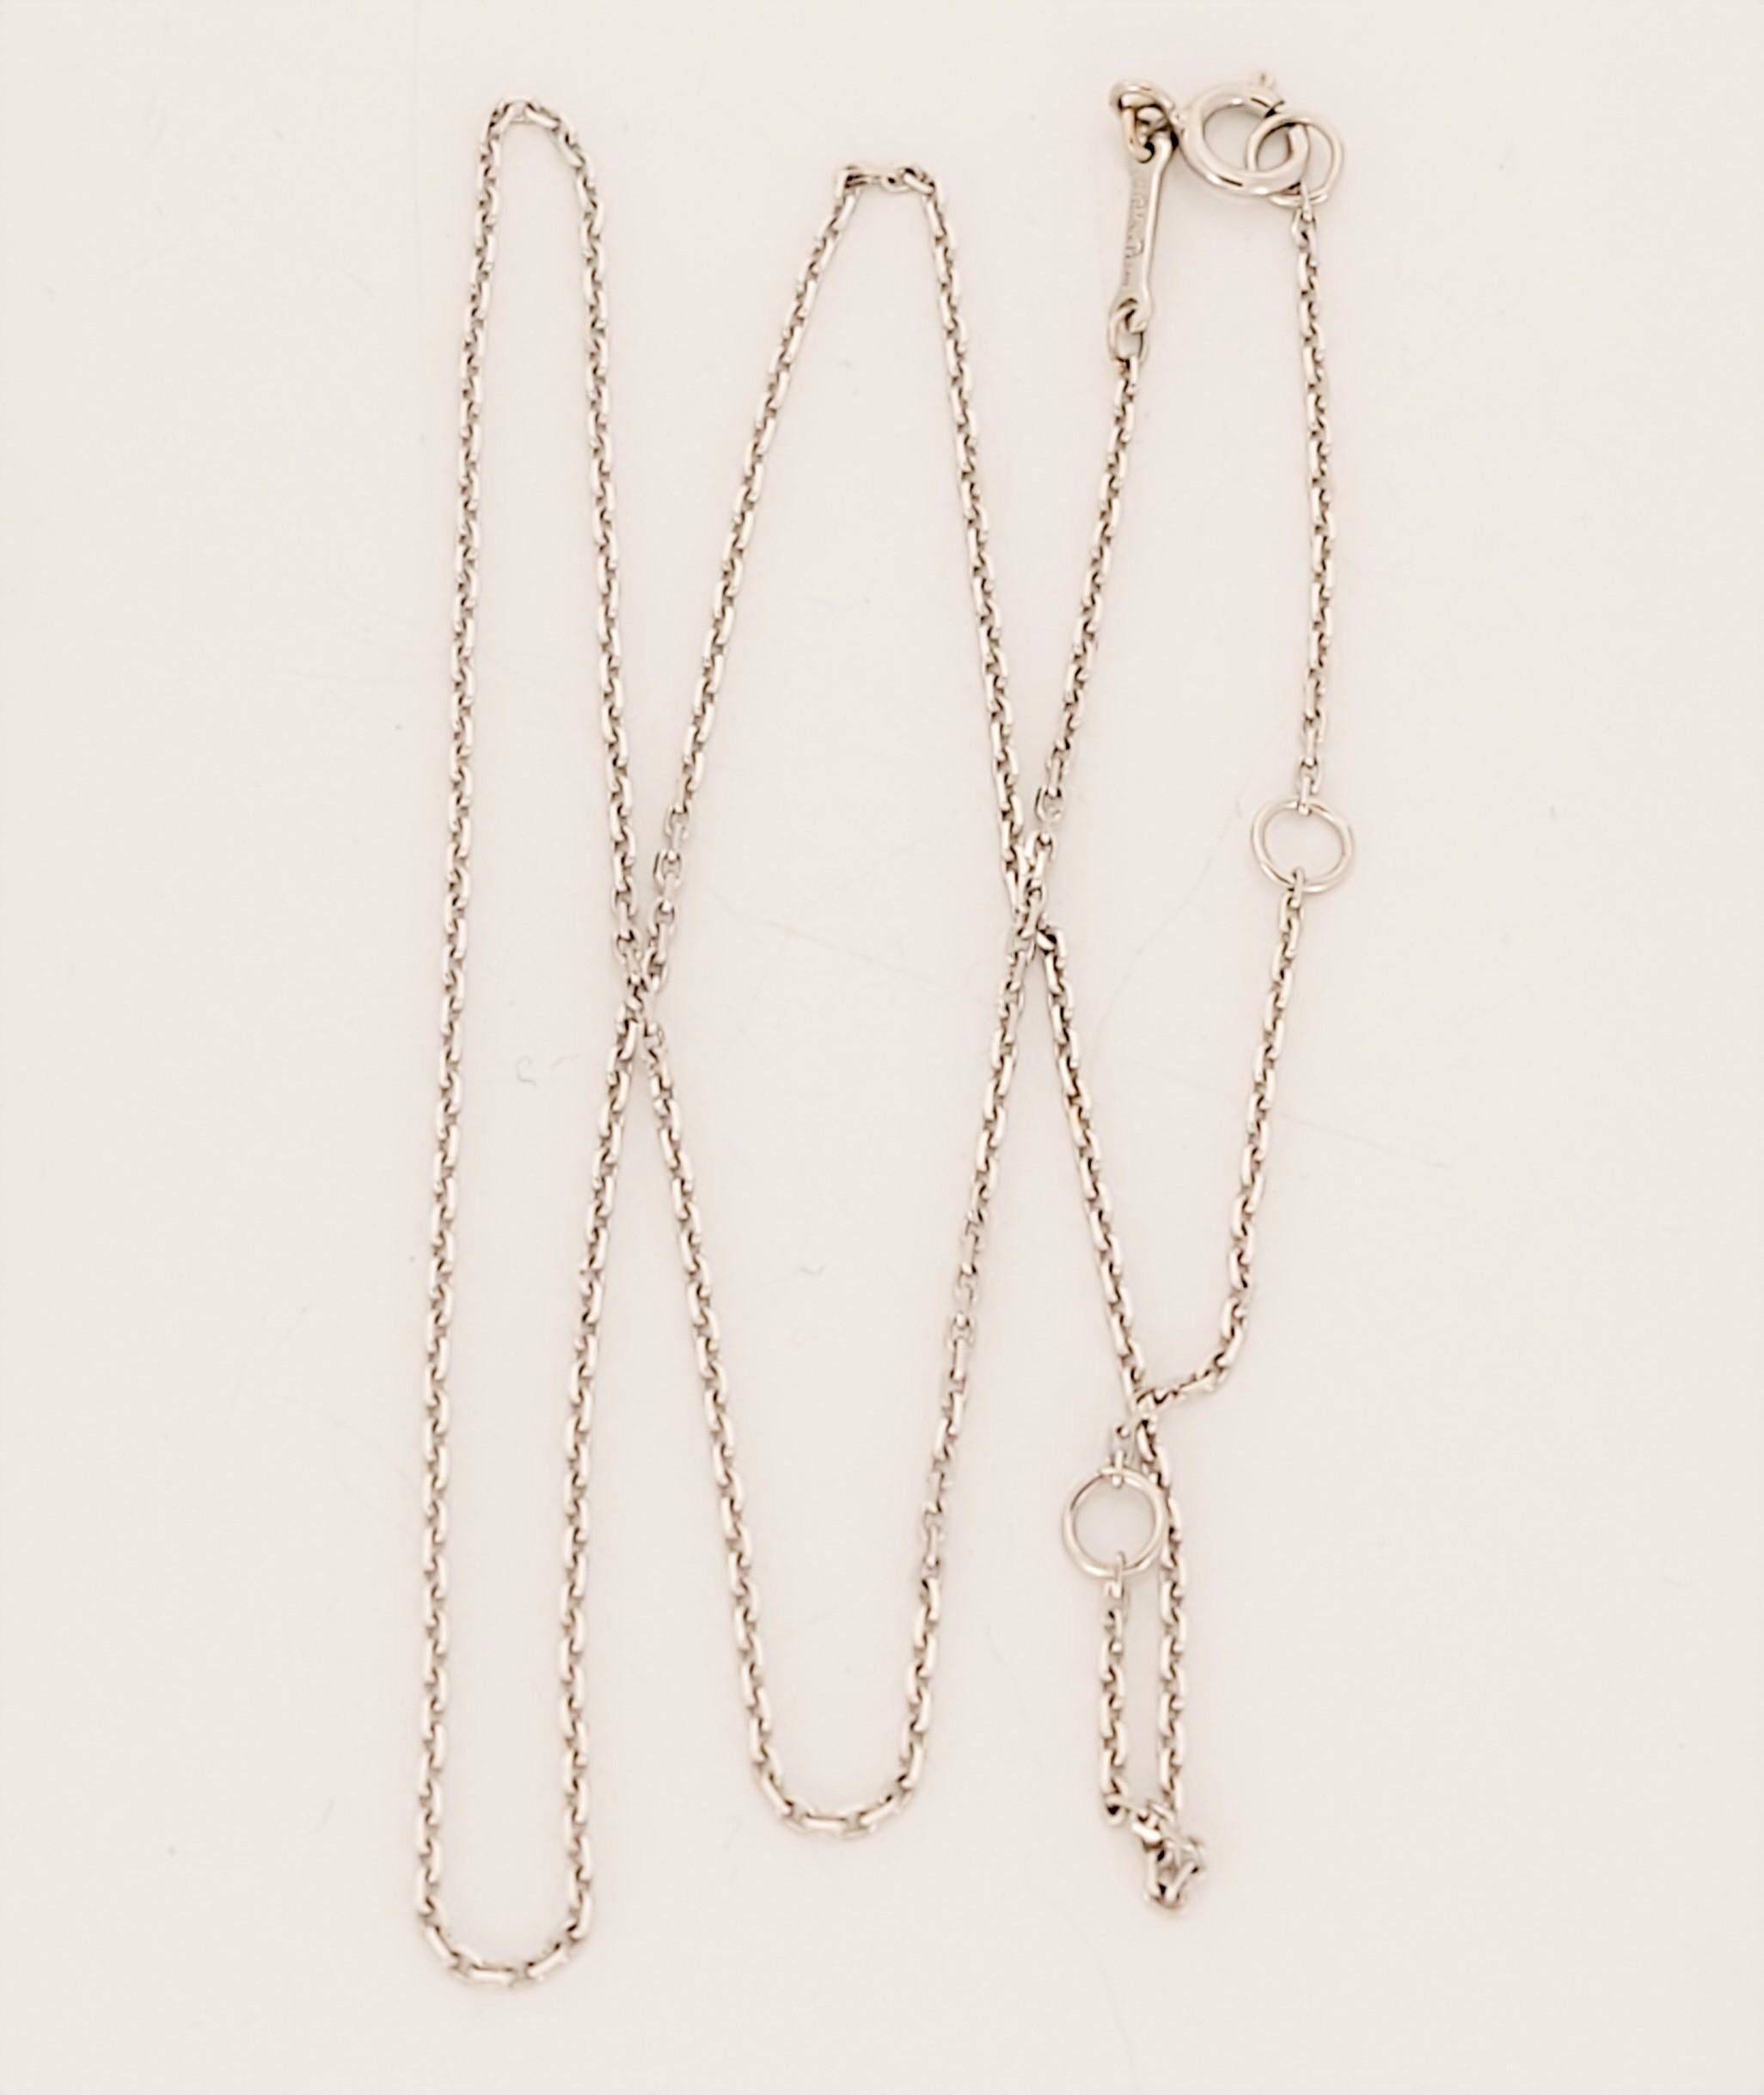 Paloma Picasso Tiffany &co  Adjustable Chain PT950 In New Condition For Sale In New York, NY